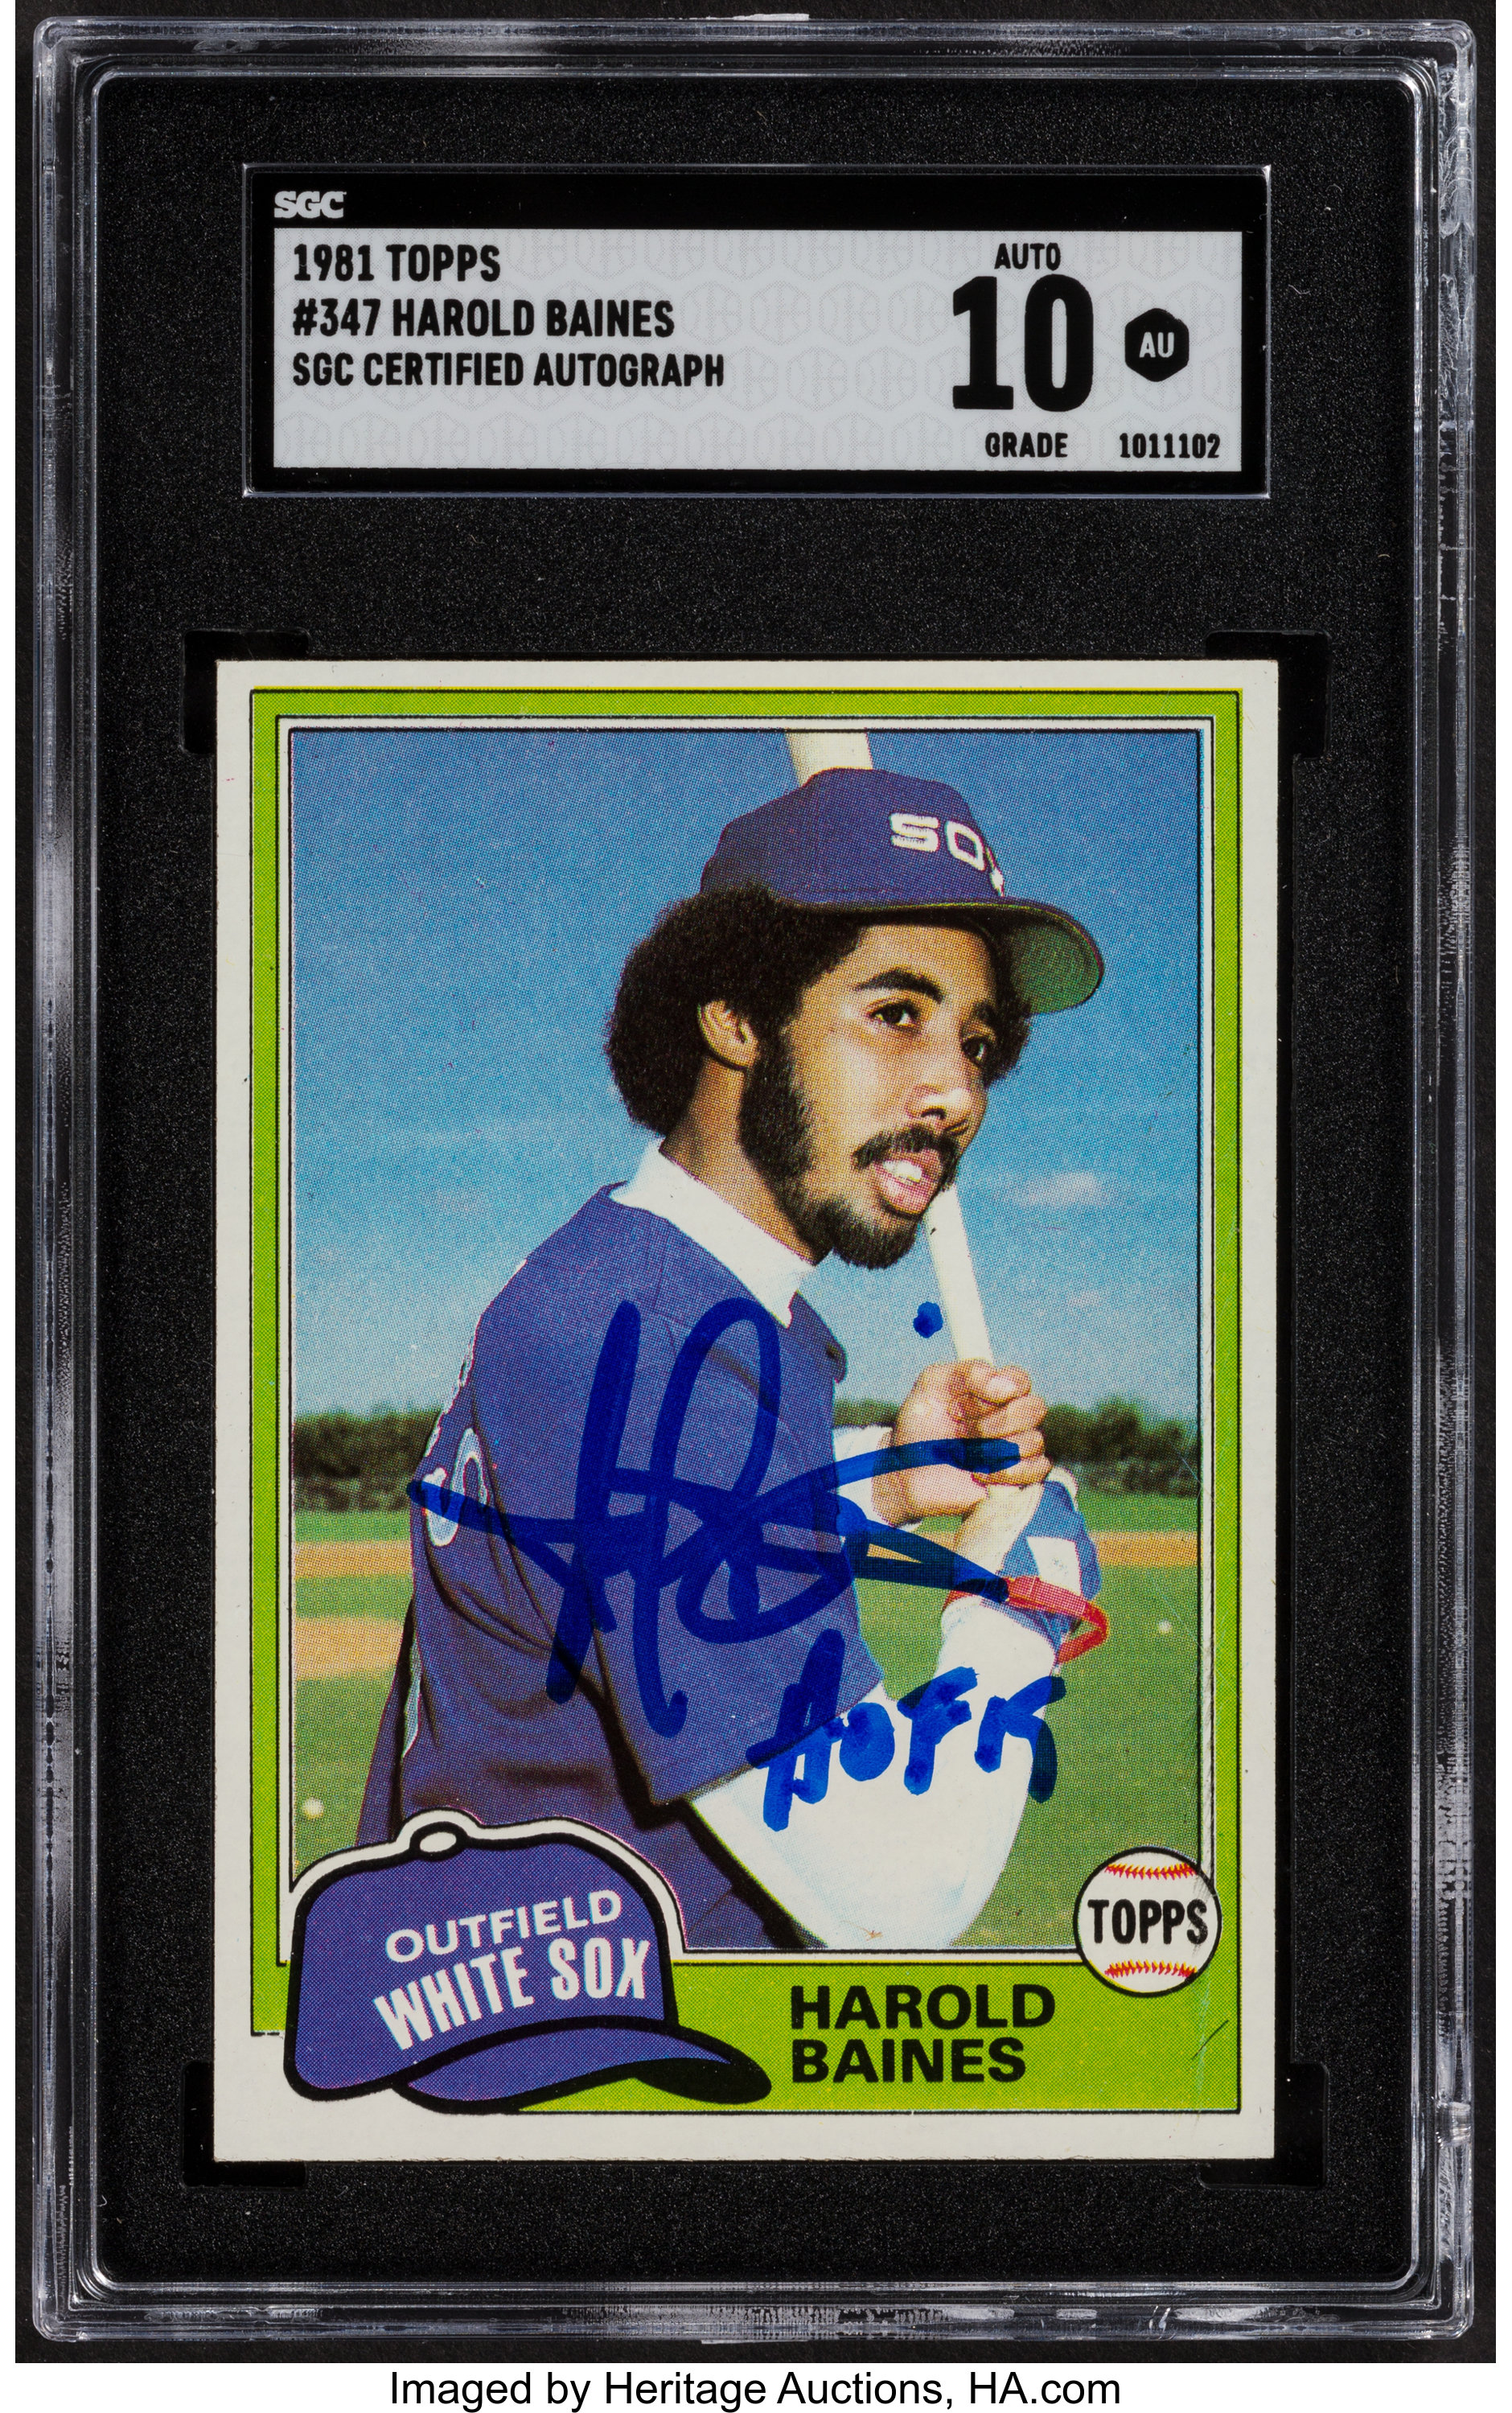 Signed 1981 Topps Harold Baines #347 SGC Authentic, 10 Autograph